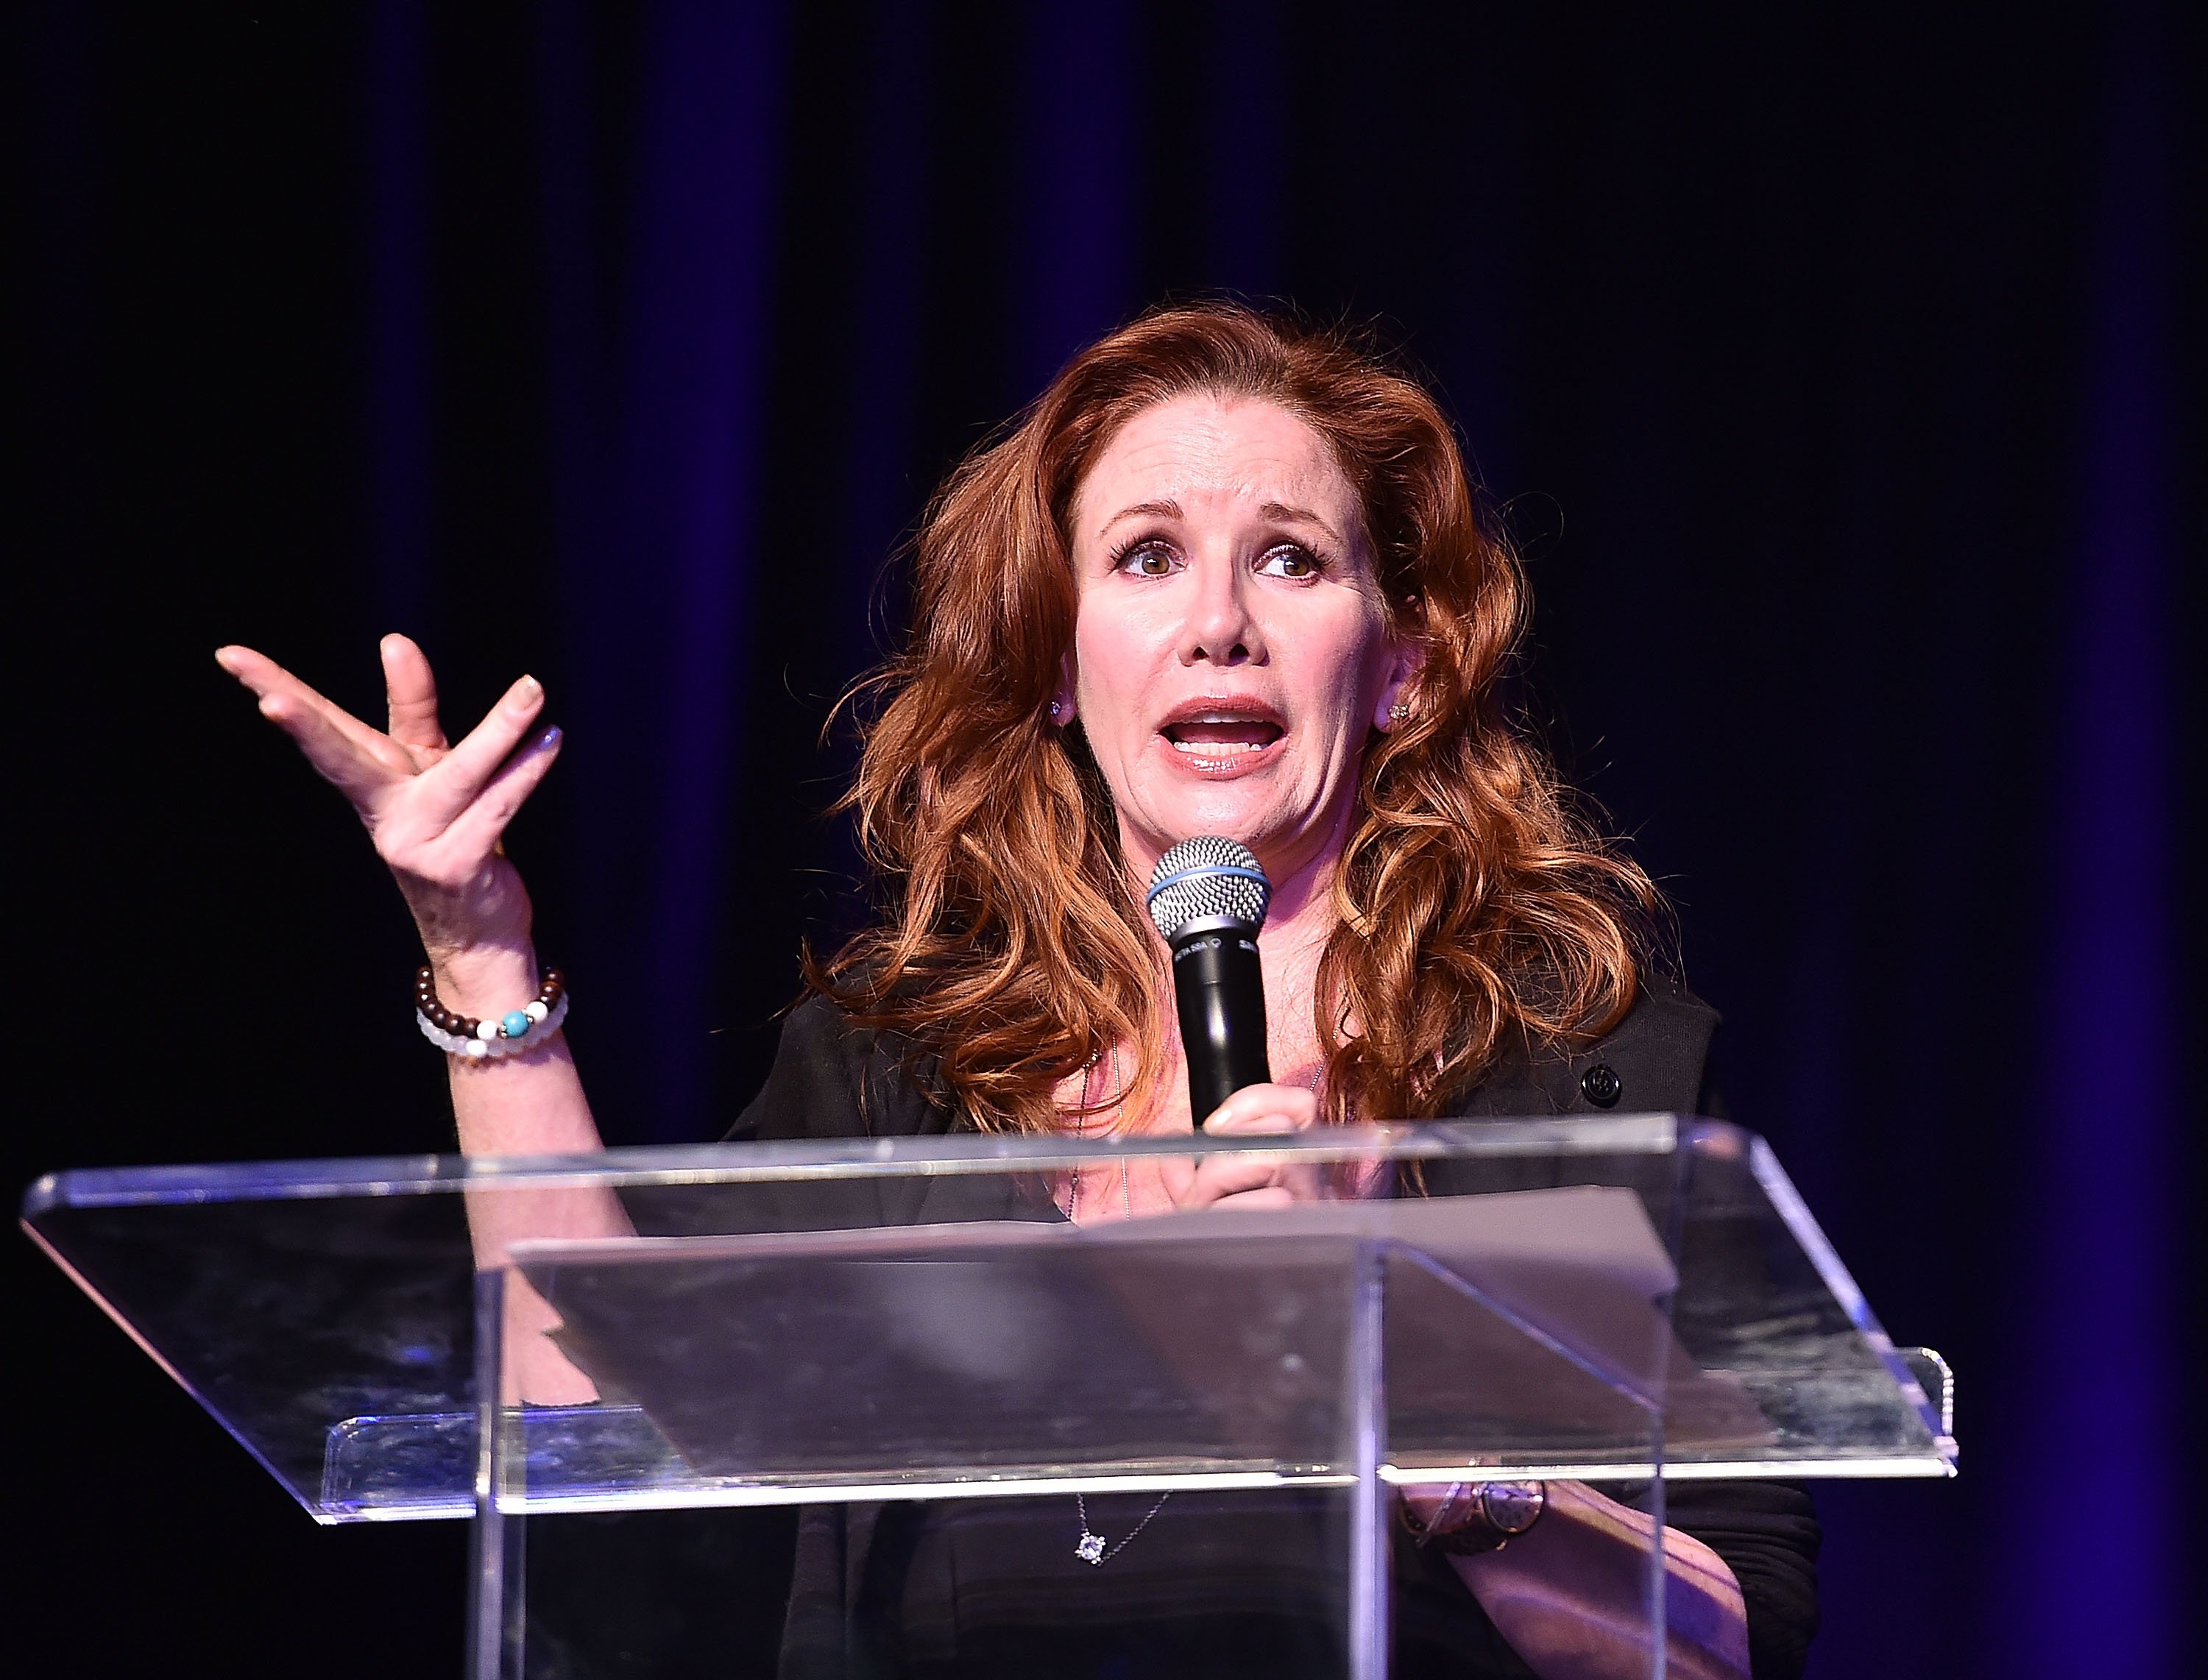 Actress Melissa Gilbert onstage at the Atlanta Ultimate Women's Expo at Georgia World Congress Center on May 3, 2015 in Atlanta, Georgia. | Source: Getty Images